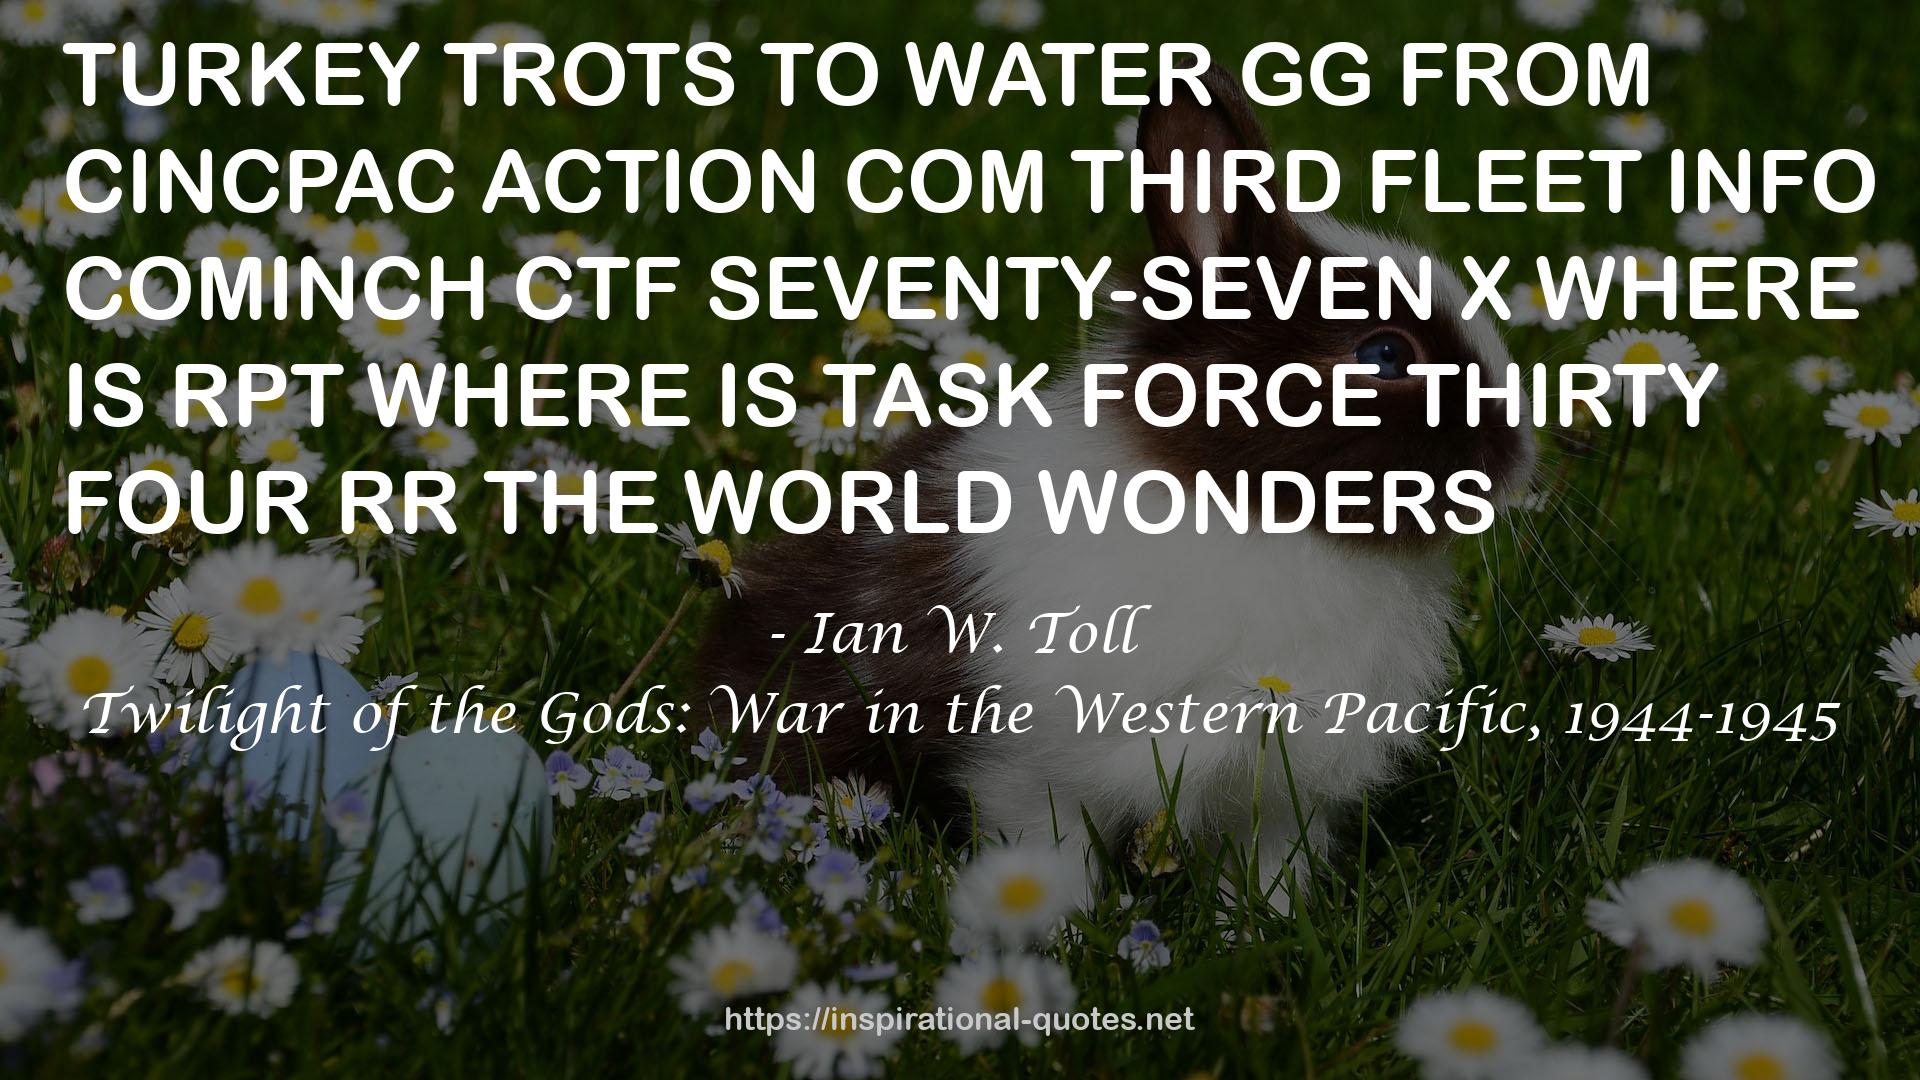 Twilight of the Gods: War in the Western Pacific, 1944-1945 QUOTES